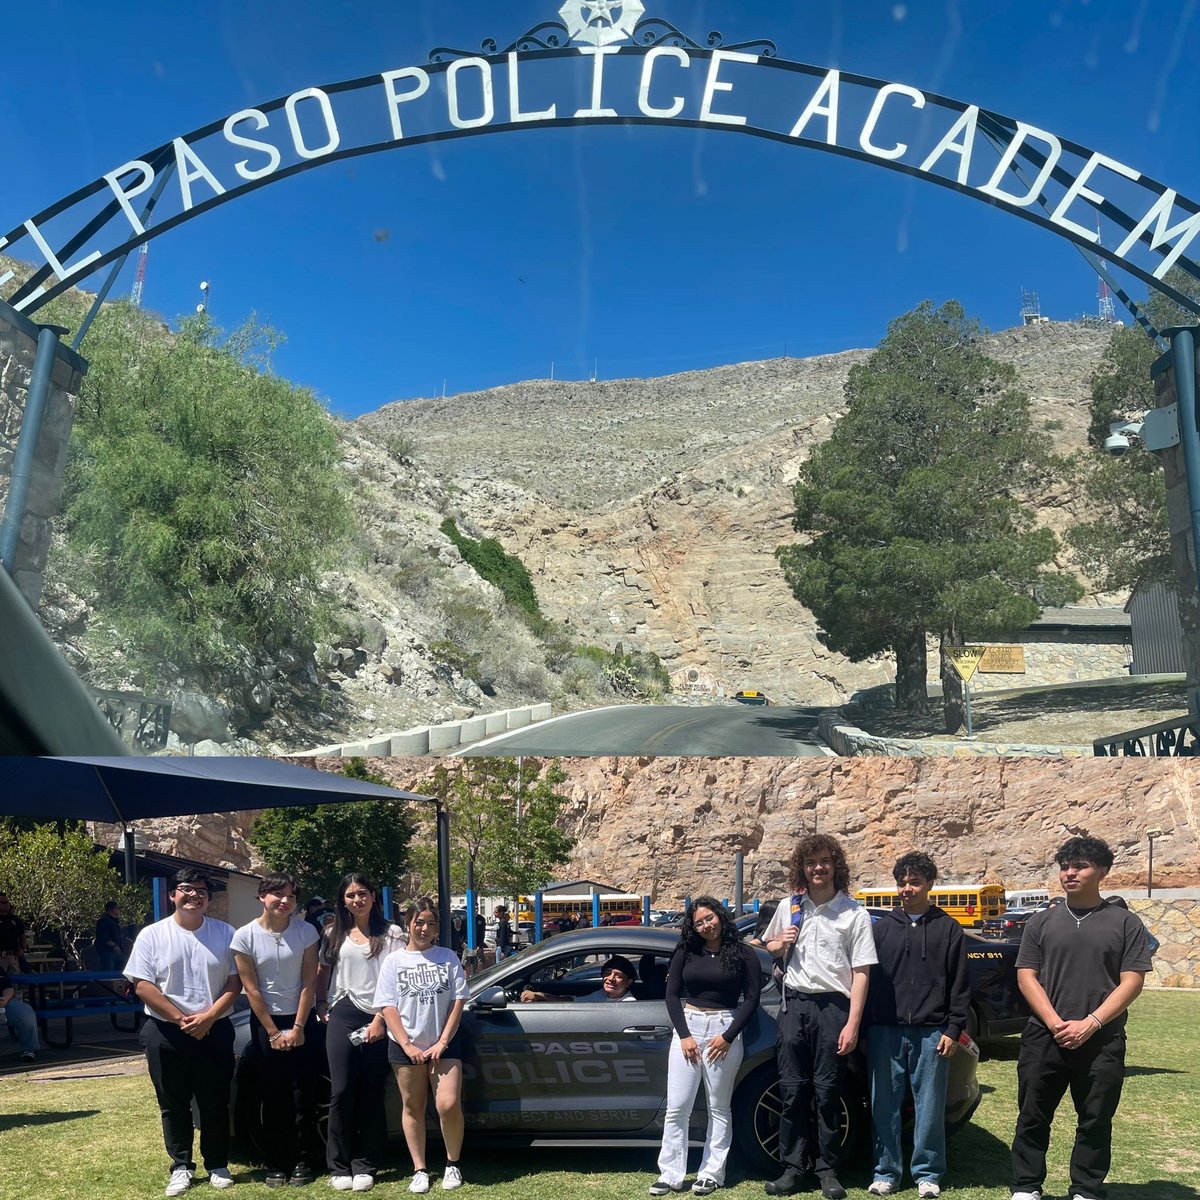 El Paso Police Academy offers Dual Credit students a unique and valuable opportunity to explore the world of law enforcement, gain hands-on experience, and build connections within the industry
#BlazerNation
#BetterTogether